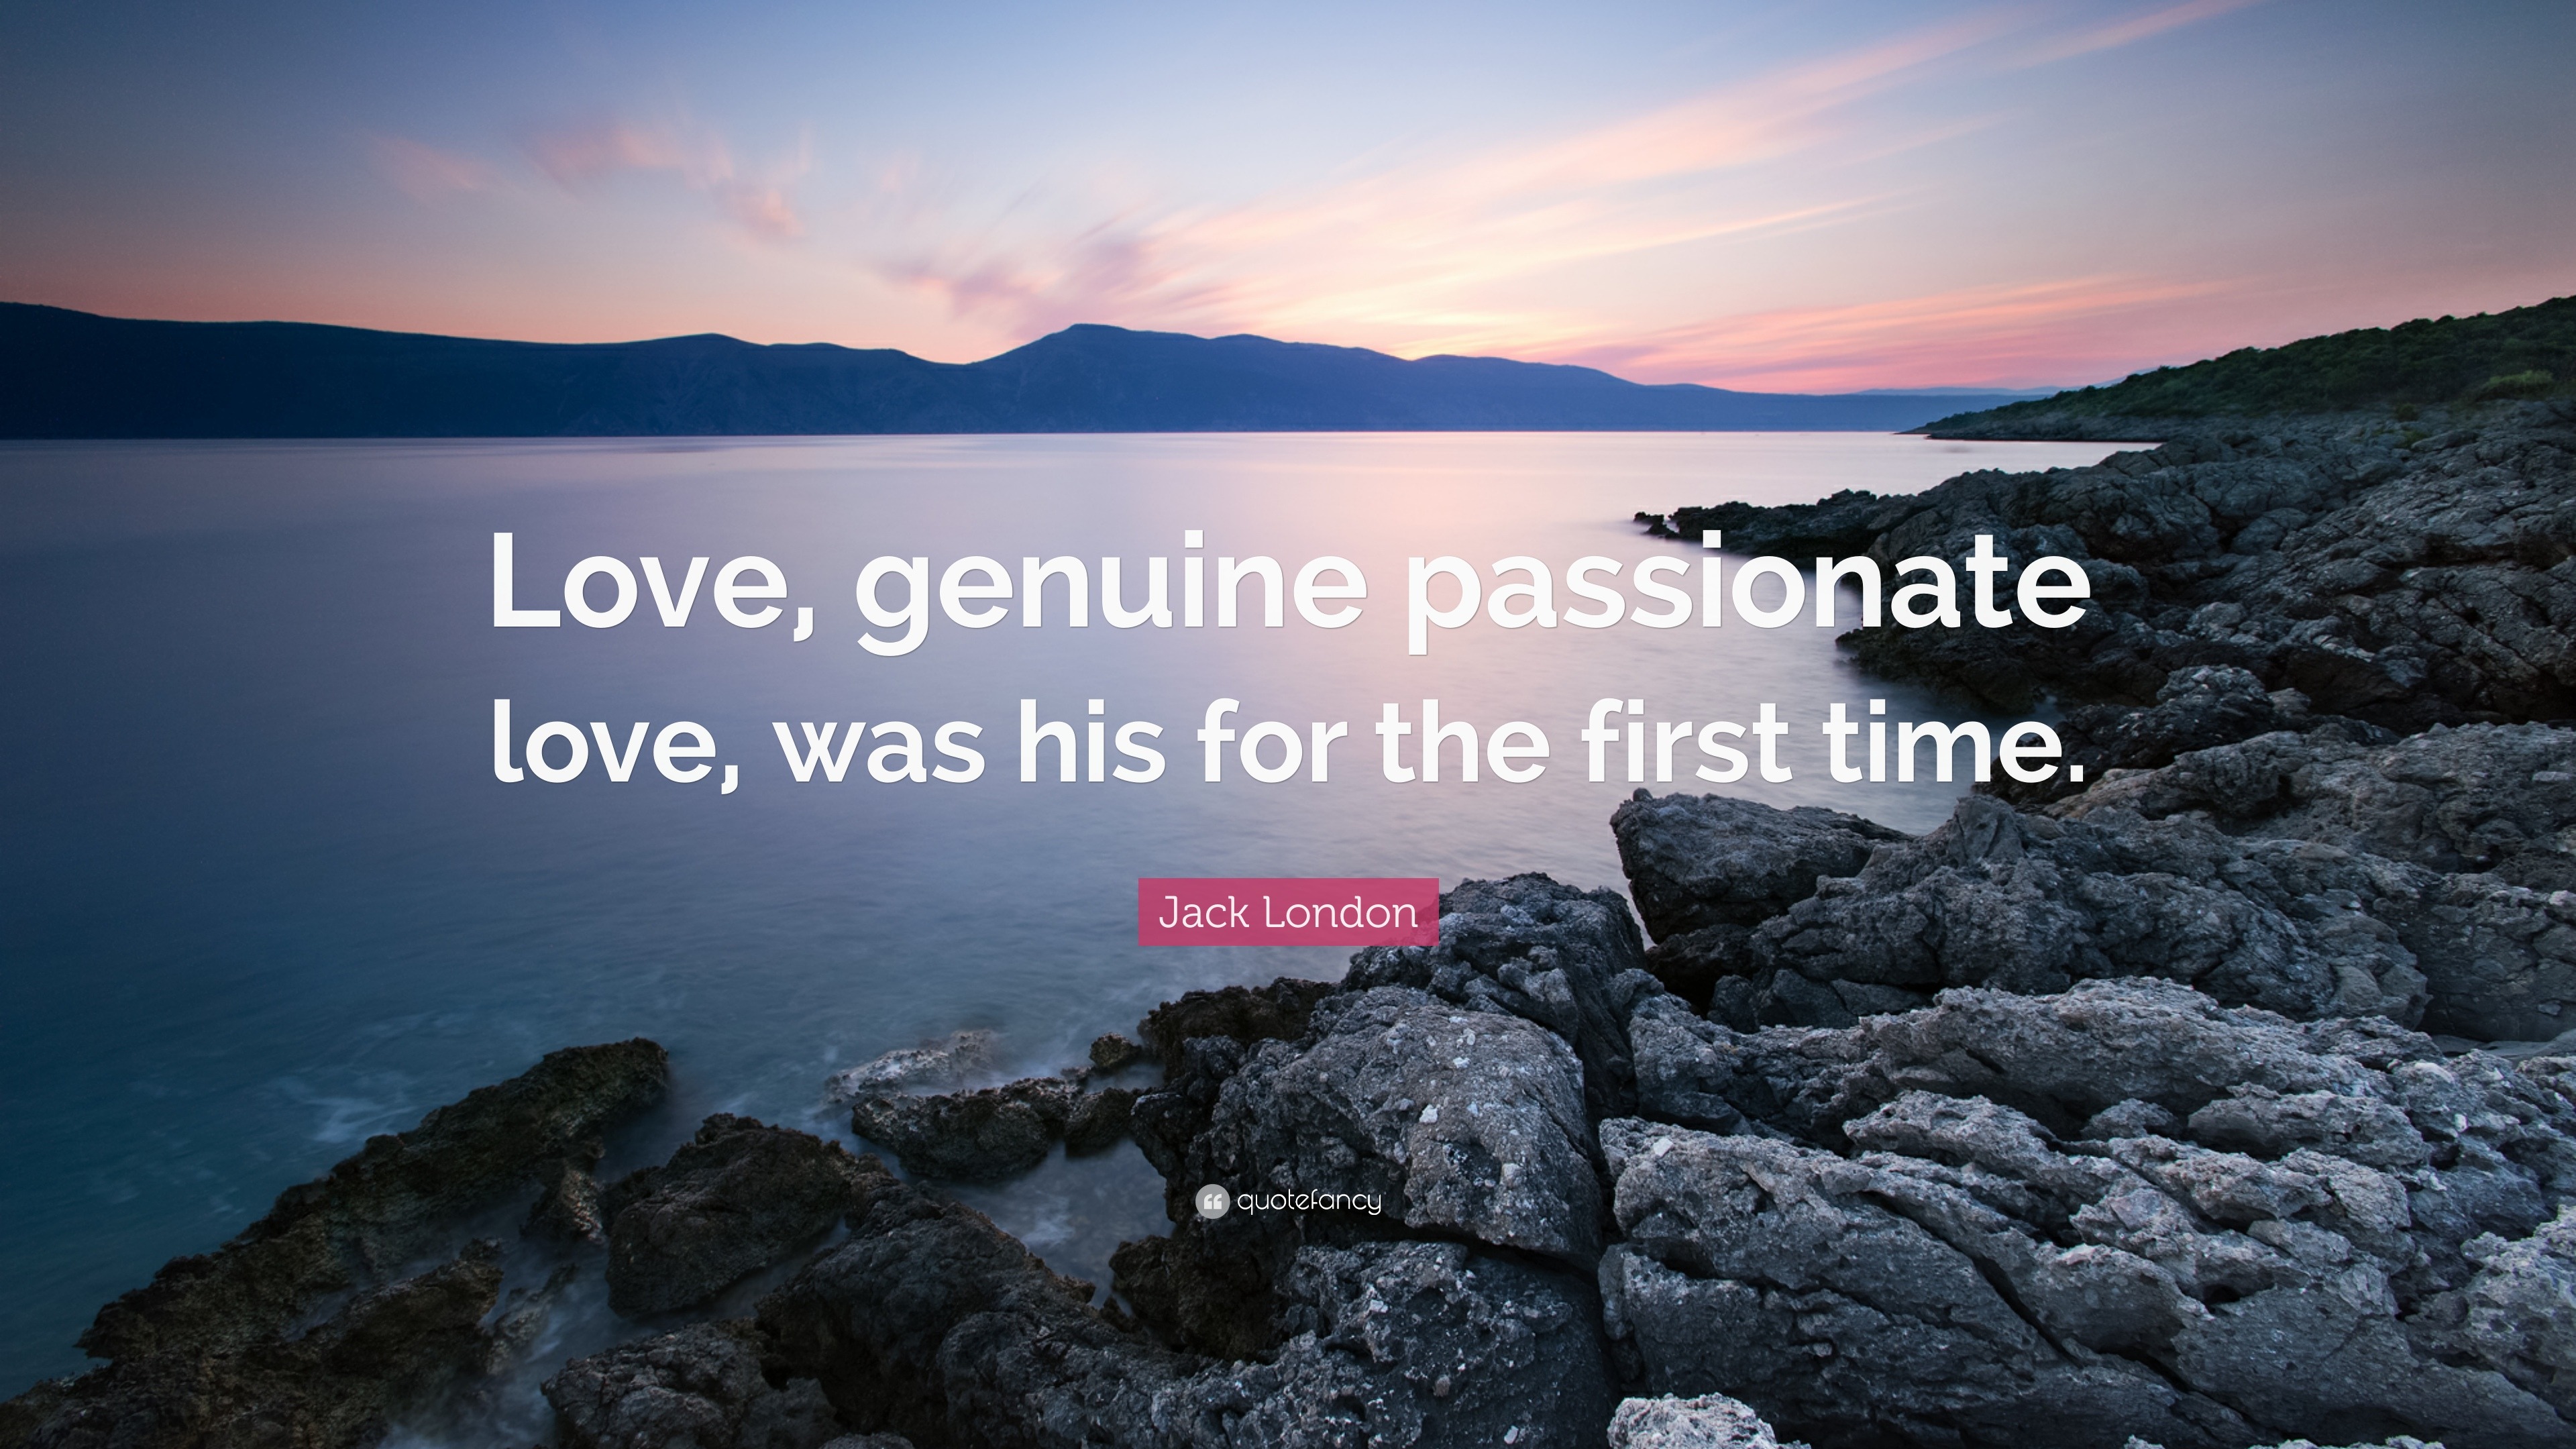 Jack London Quote “Love genuine passionate love was his for the first